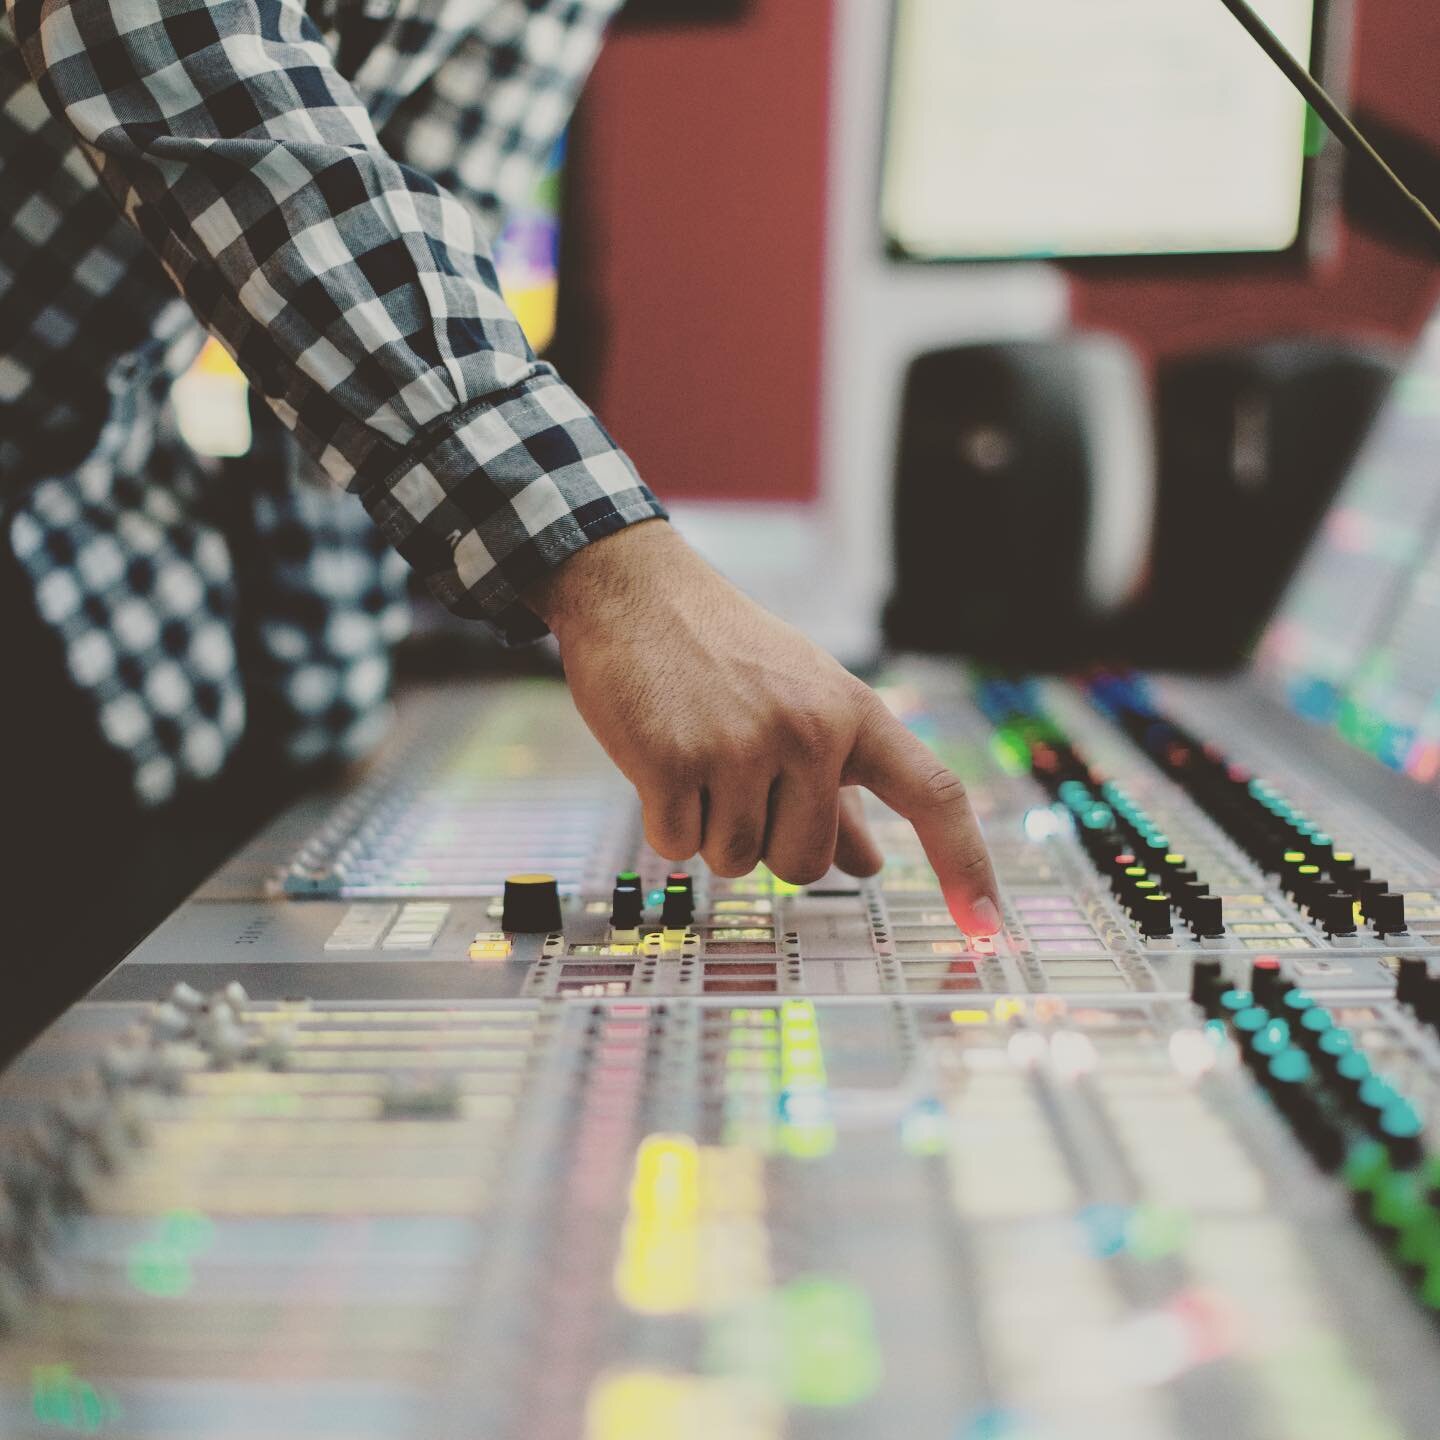 Cada Casa has partnered with the Oregon Recording Studio (ORS) to provide an outreach program for students interested in exploring audio production arts. This 10-week sound tech program includes 120 hours of instruction, mentorship, and on-site exper